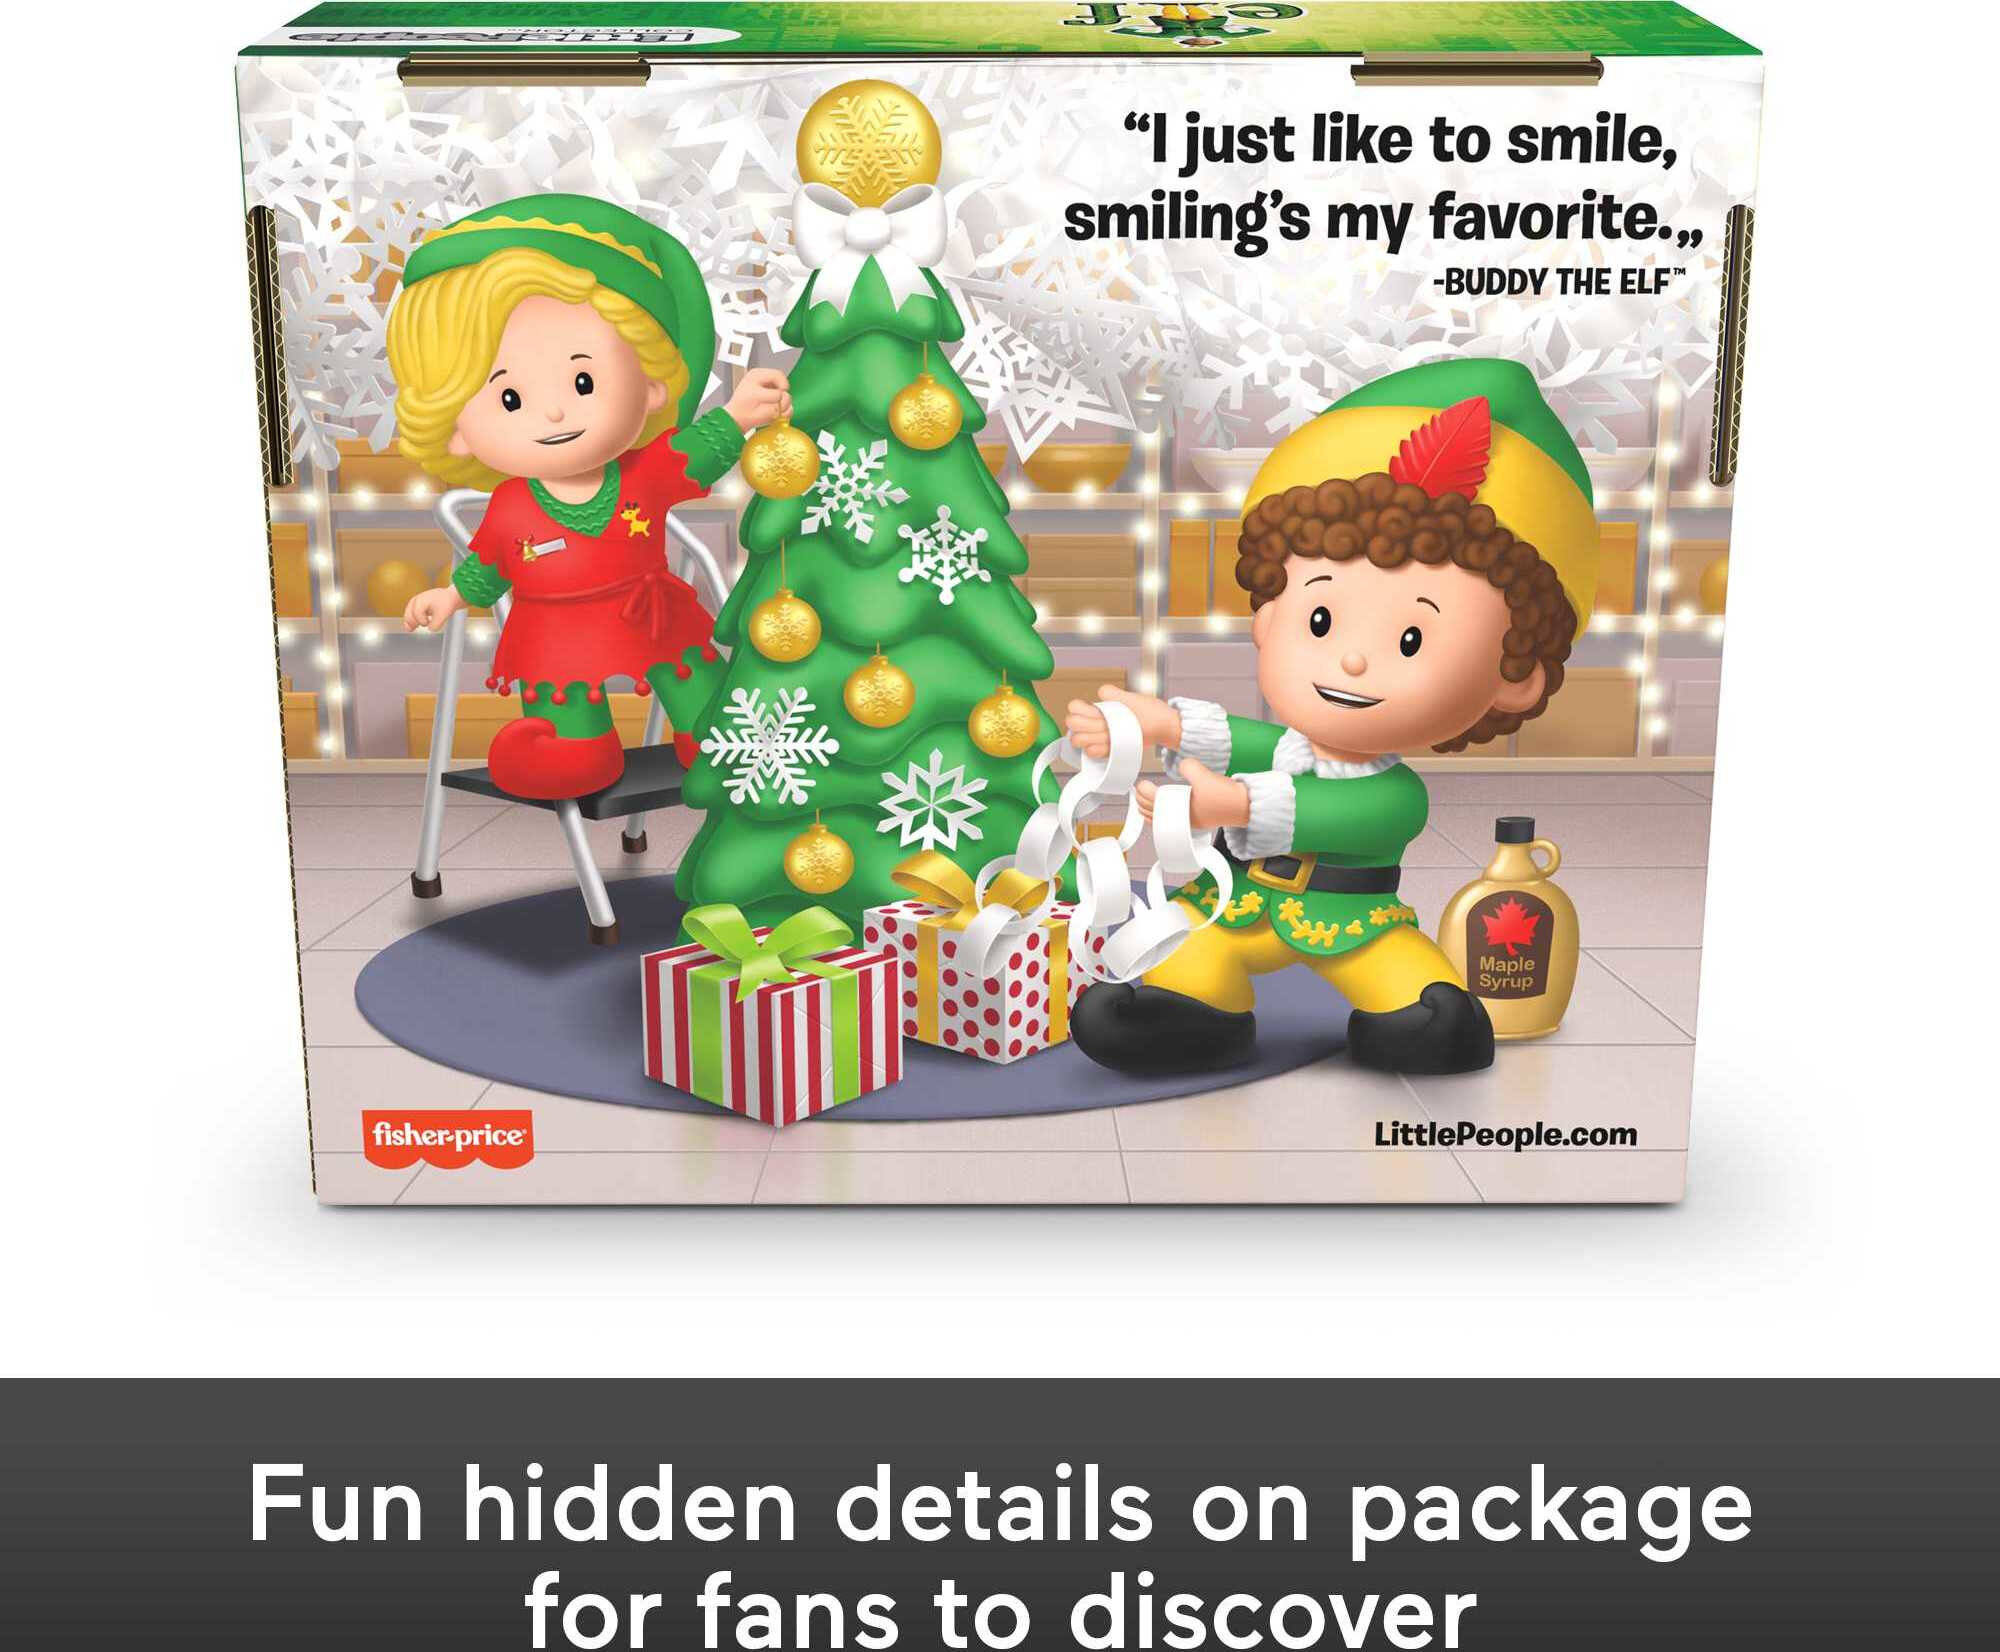 Little People Collector Elf Movie Special Edition Figure Set in Christmas Box for Adults & Fans - image 7 of 7